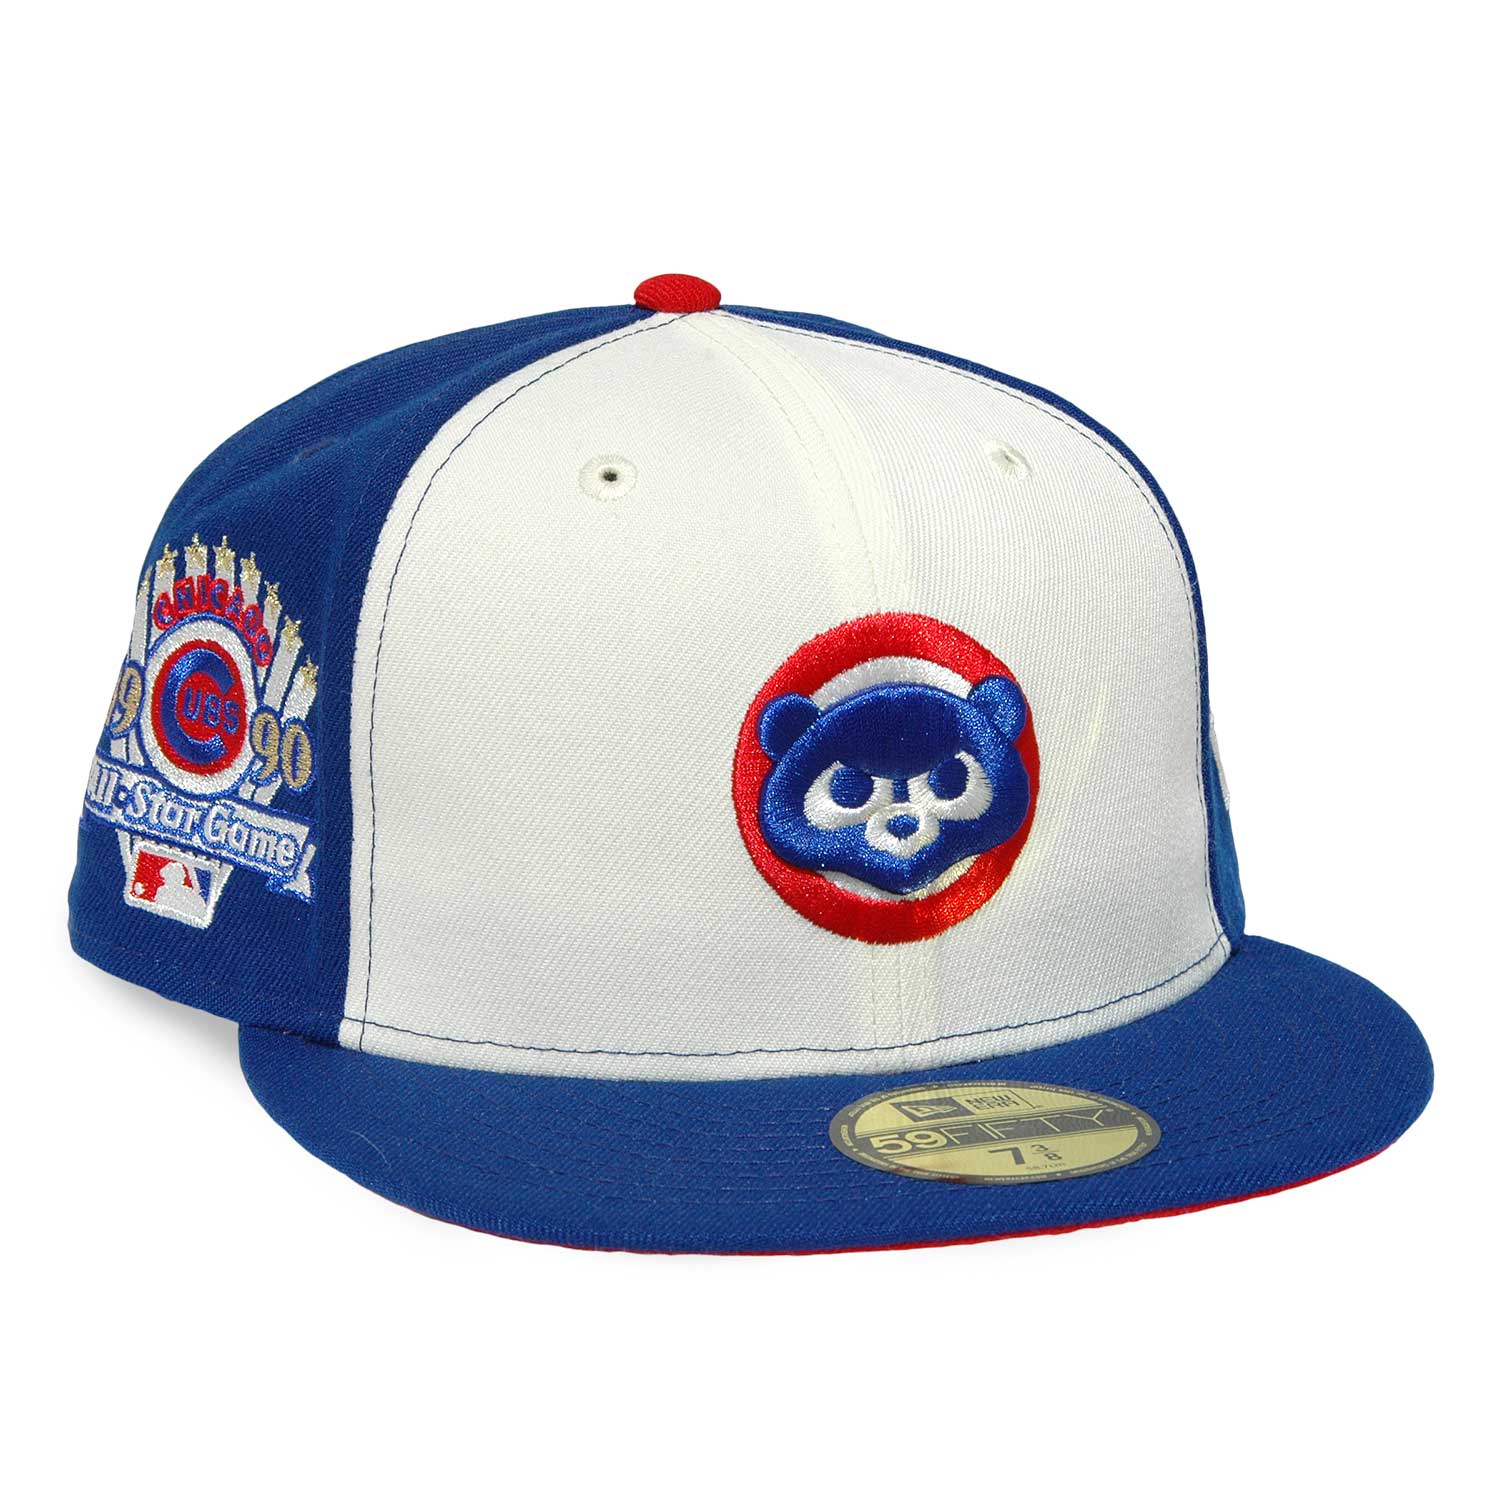 Chicago Cubs 1984 Bear w/ 1990 All Star Game Patch 59FIFTY Fitted Cap 7 1/2 = 23 1/2 in = 59.7 cm